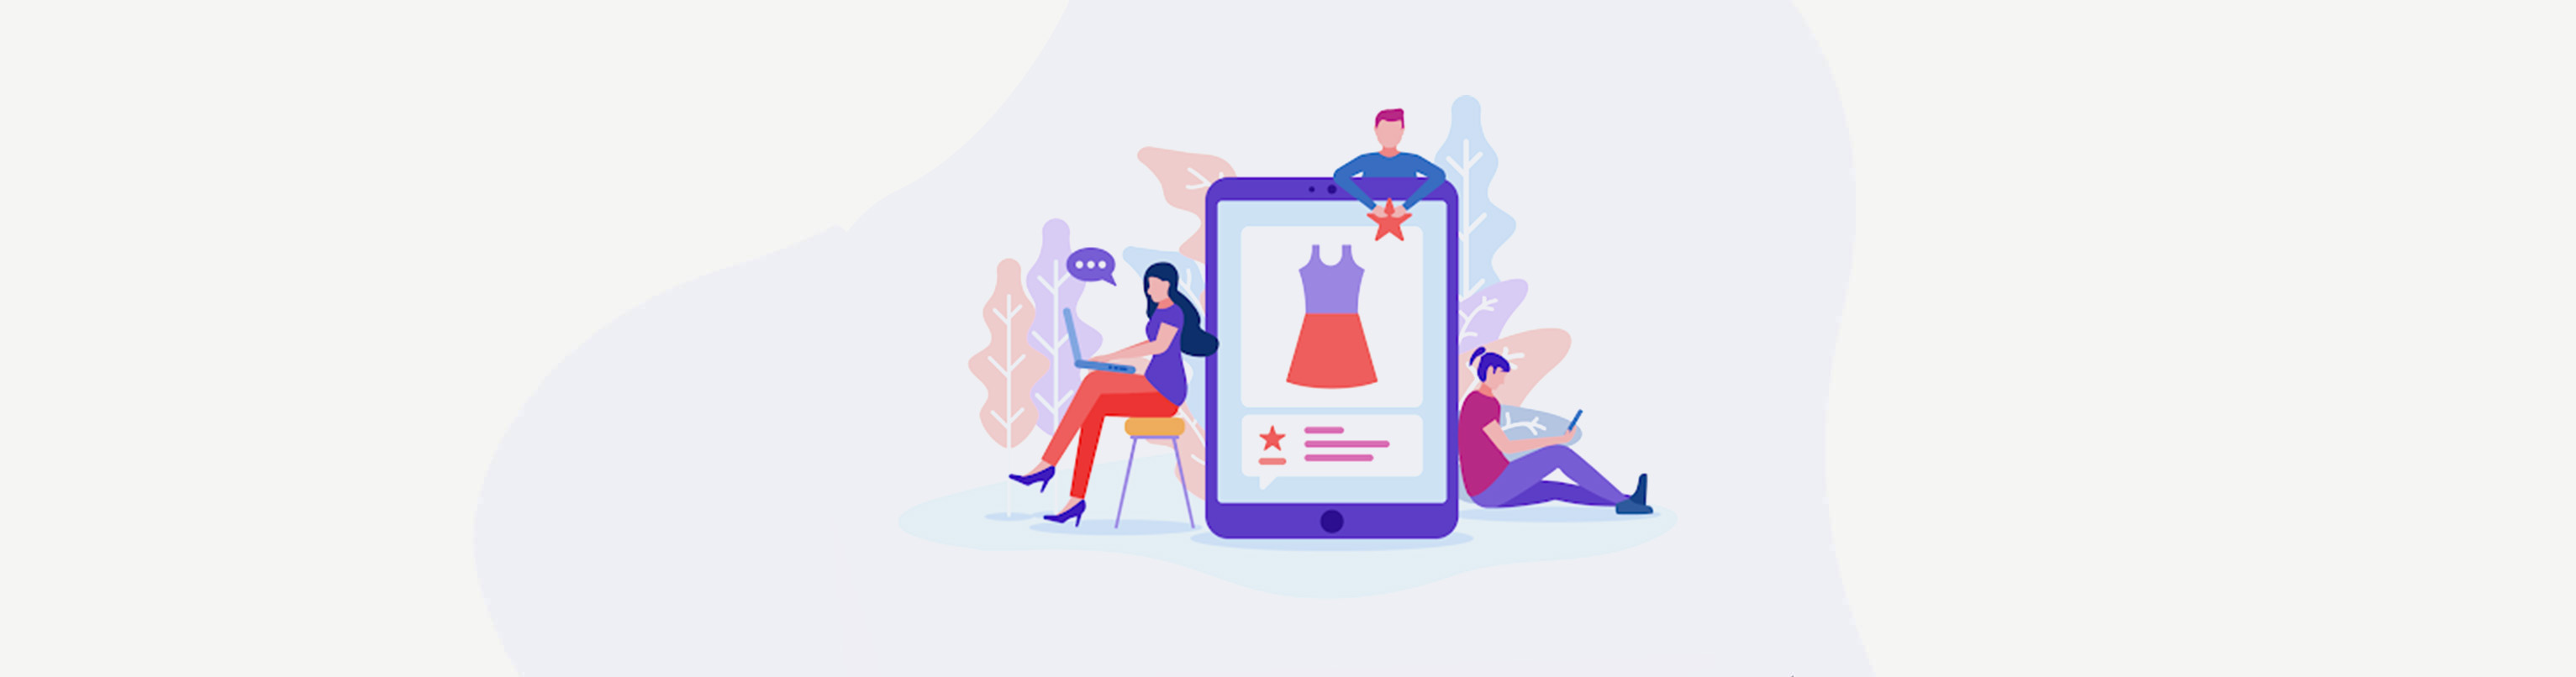 How To Get Product Reviews For Your eCommerce Store